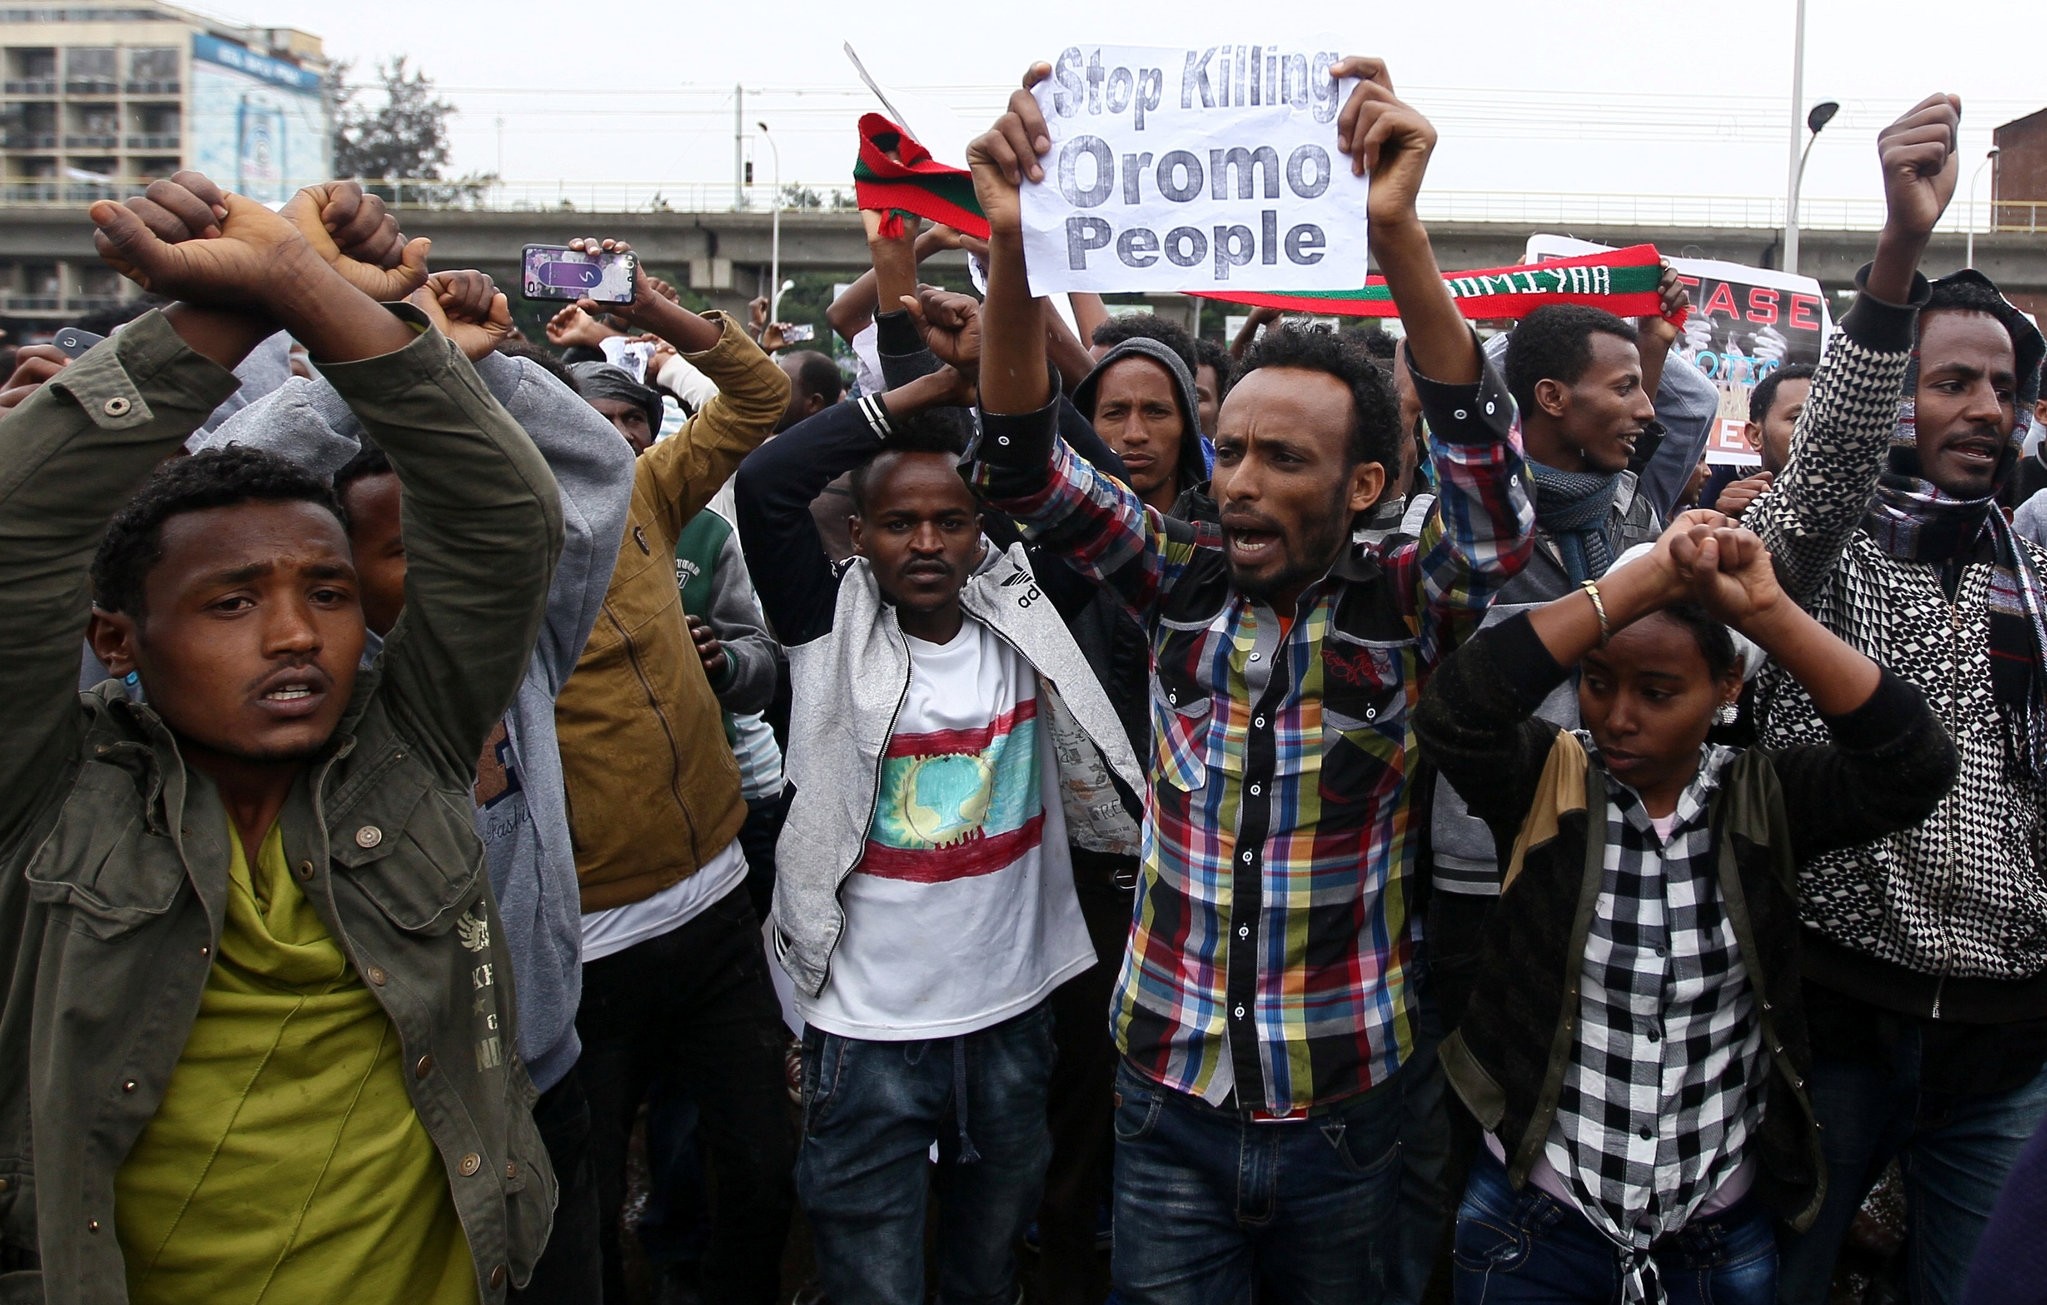 Protesters chant slogans during a demonstration over what they say is unfair distribution of wealth in the country at Meskel Square in Ethiopia's capital Addis Ababa, August 6, 2016. (REUTERS Photo)